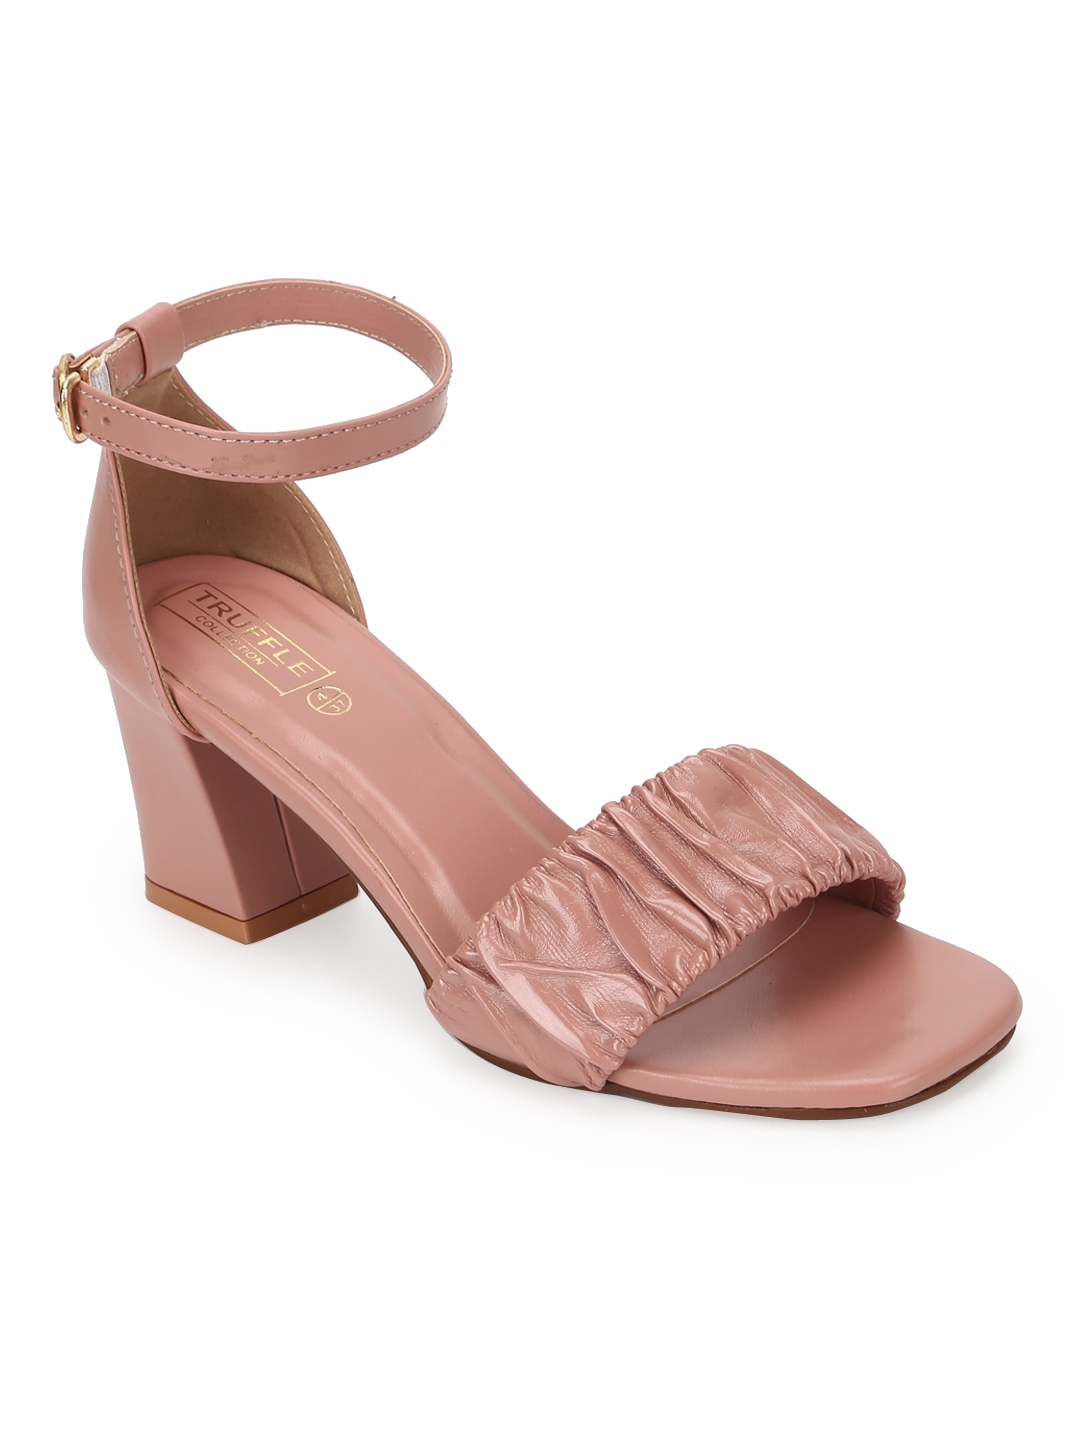 Truffle Collection | Nude PU Wrinkled Strap Block Heel Sandals